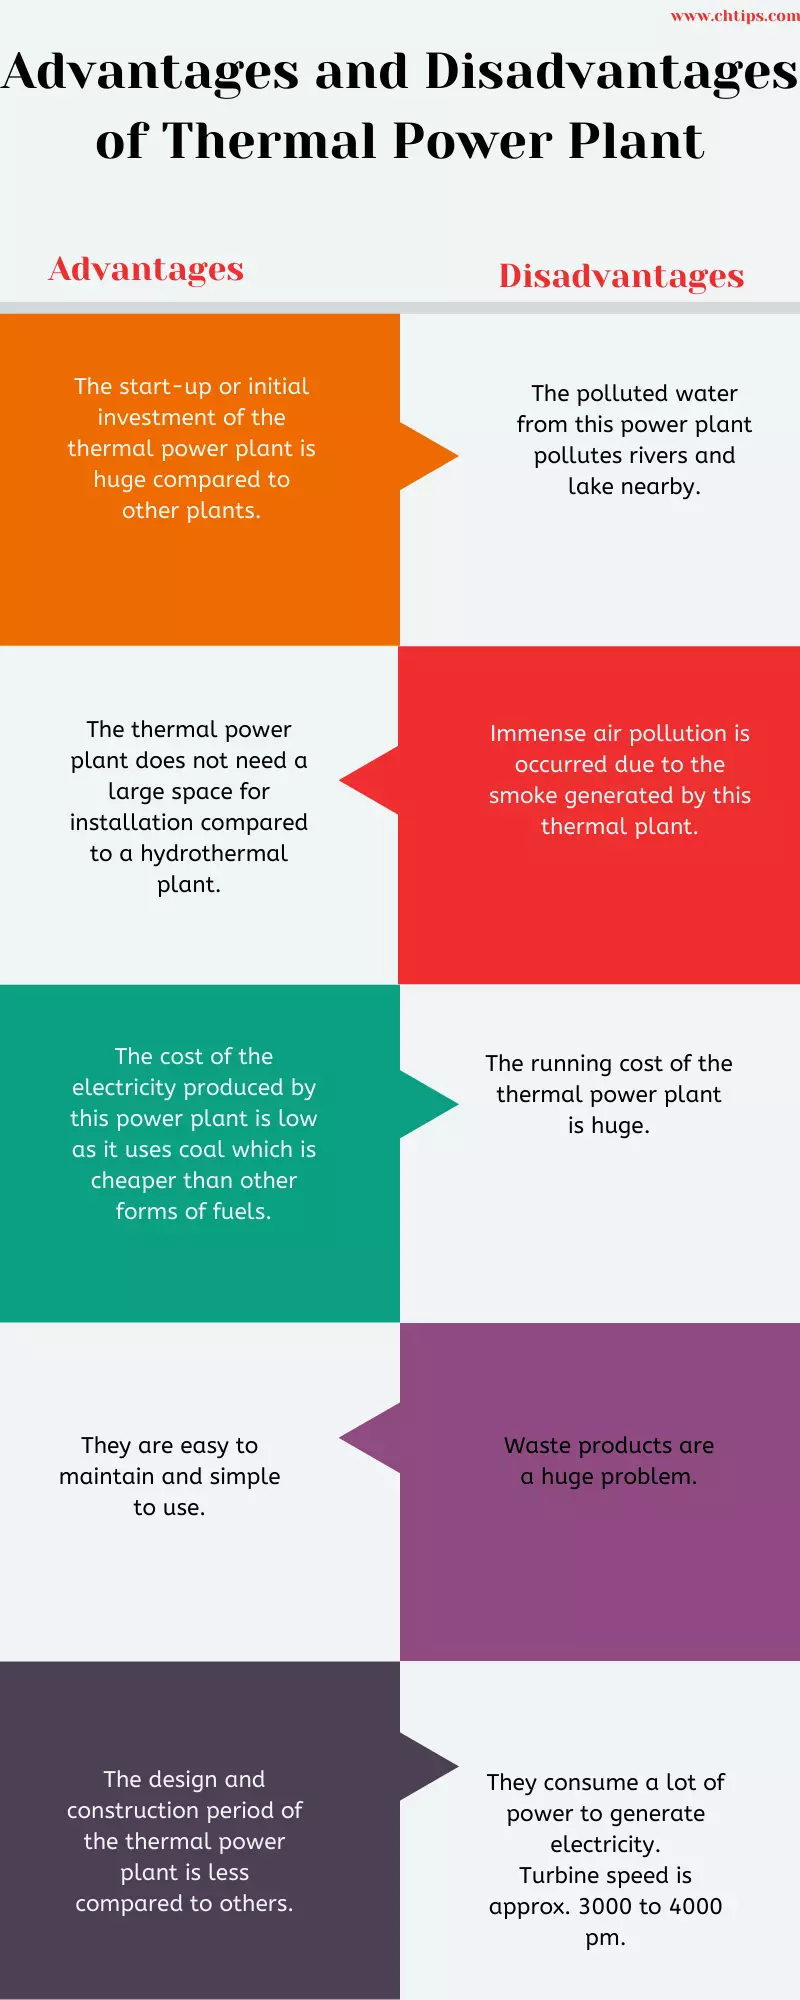 Advantages and Disadvantages of Thermal Power Plant